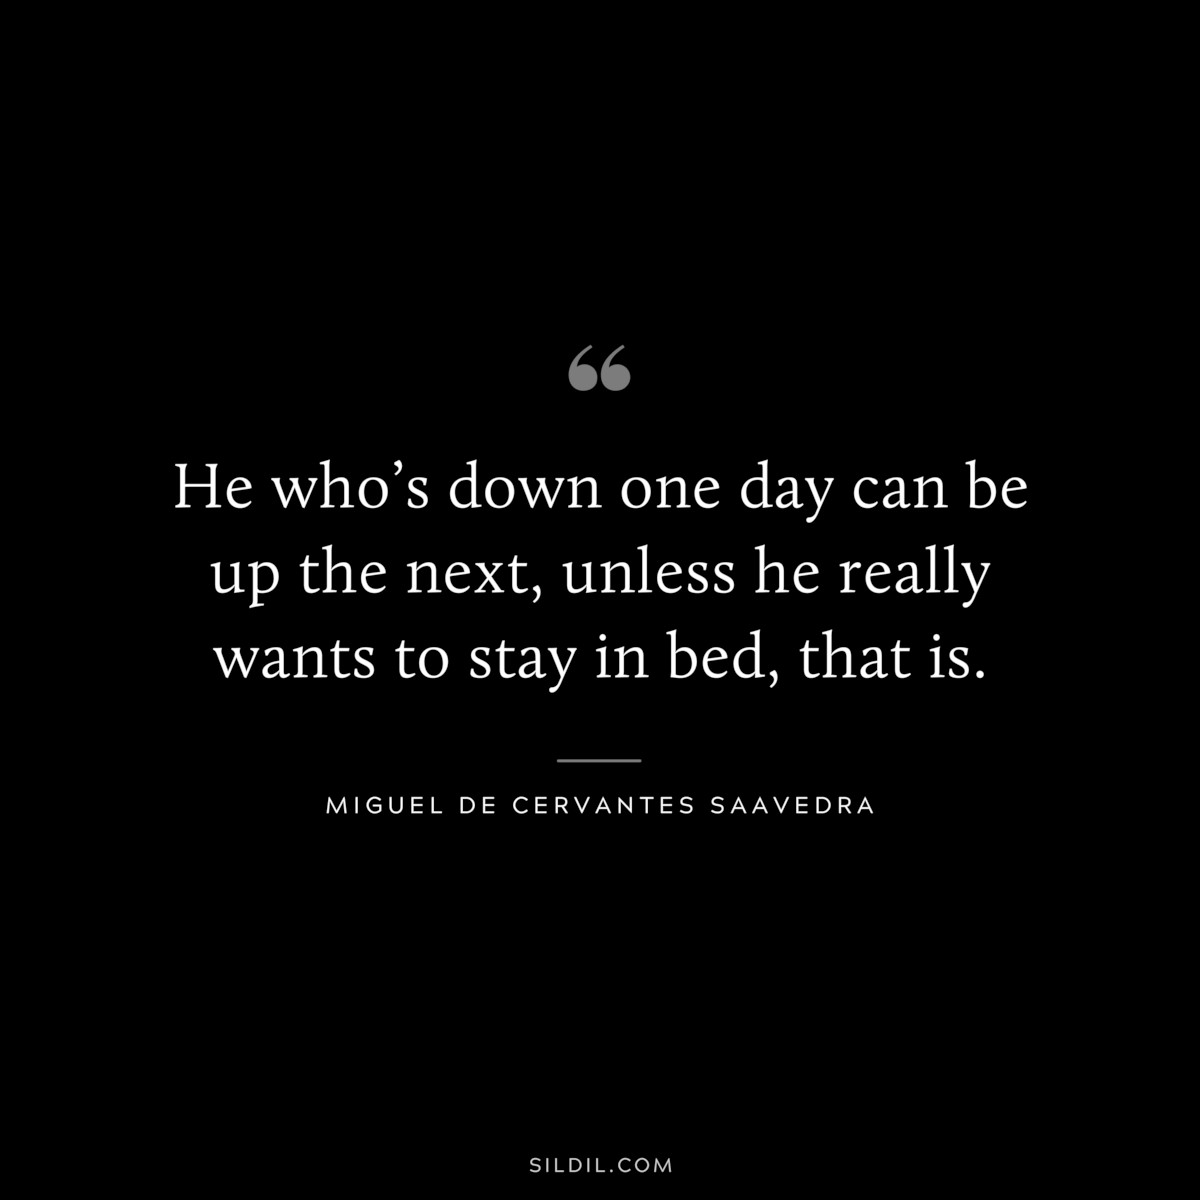 He who’s down one day can be up the next, unless he really wants to stay in bed, that is. ― Miguel de Cervantes Saavedra